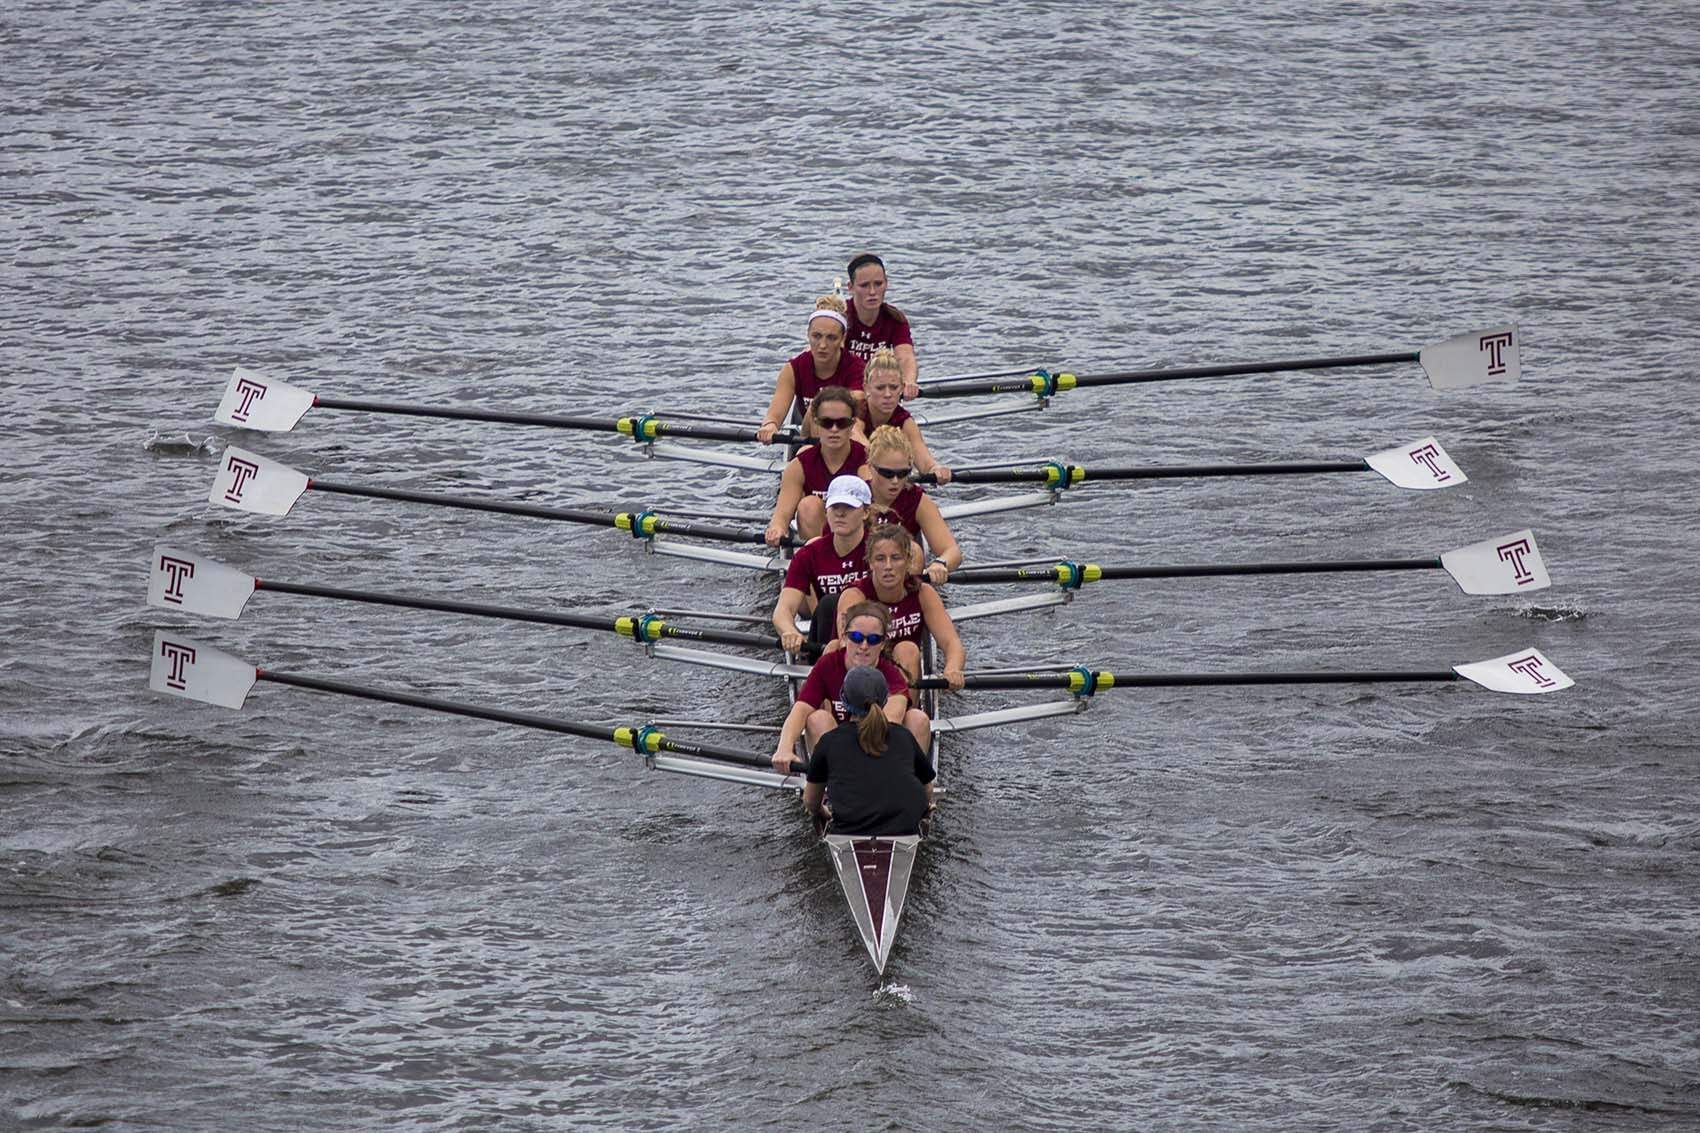 A rowing team from Temple University training before the Head of the Charles Regatta. (Jesse Costa/WBUR)